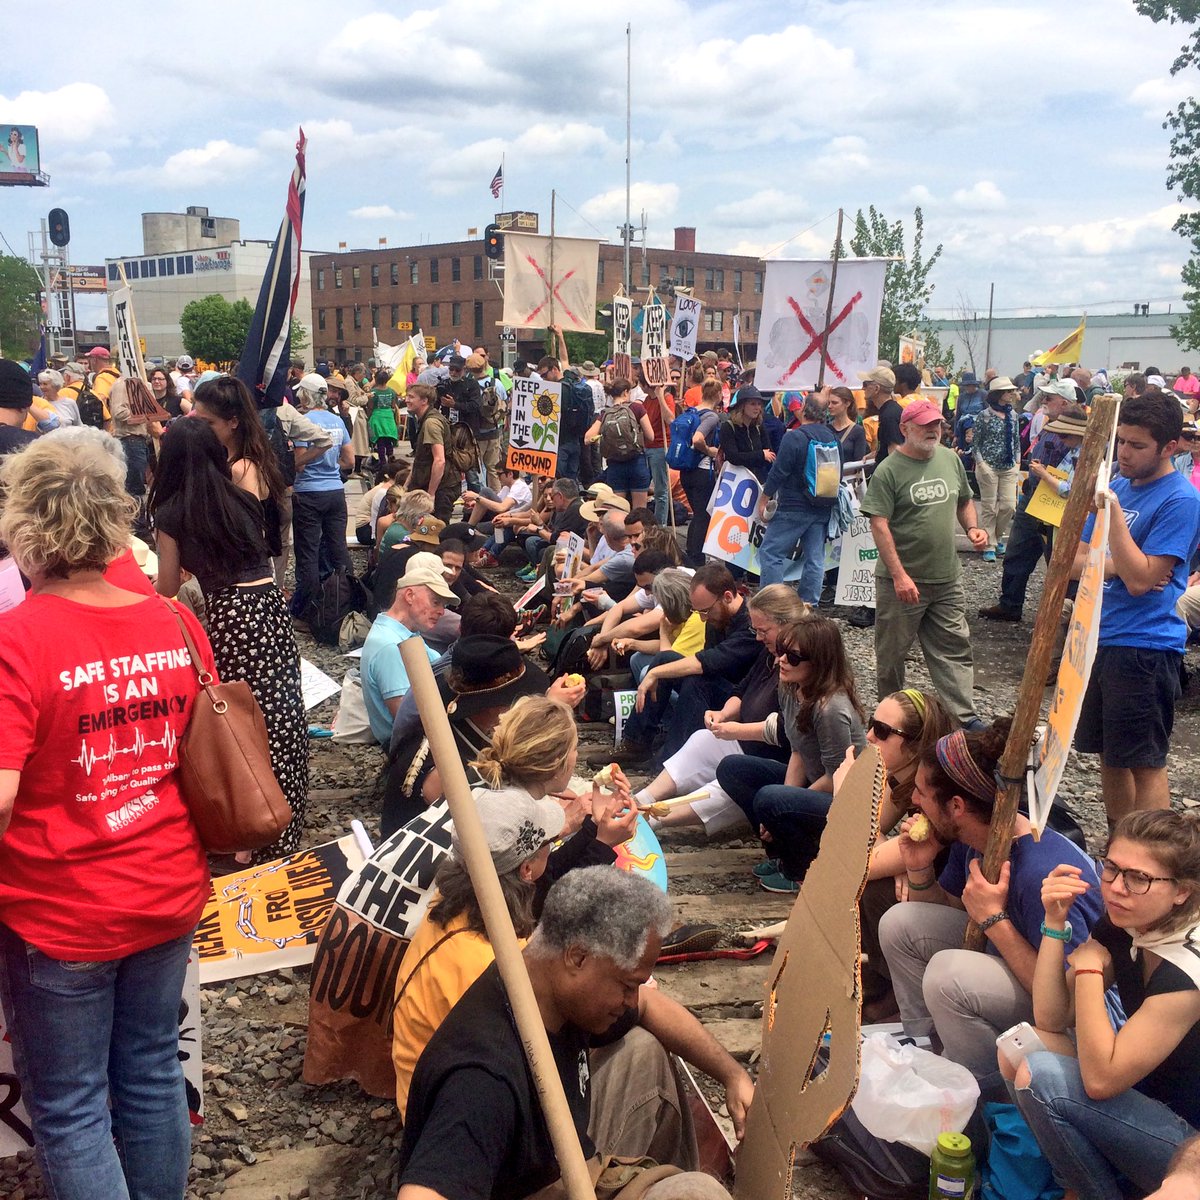 RT @mkink: Bomb train tracks occupied by entire march in Albany: leave it in the ground! @BanBombTrains @350 #breakfree2016 https://t.co/v2…